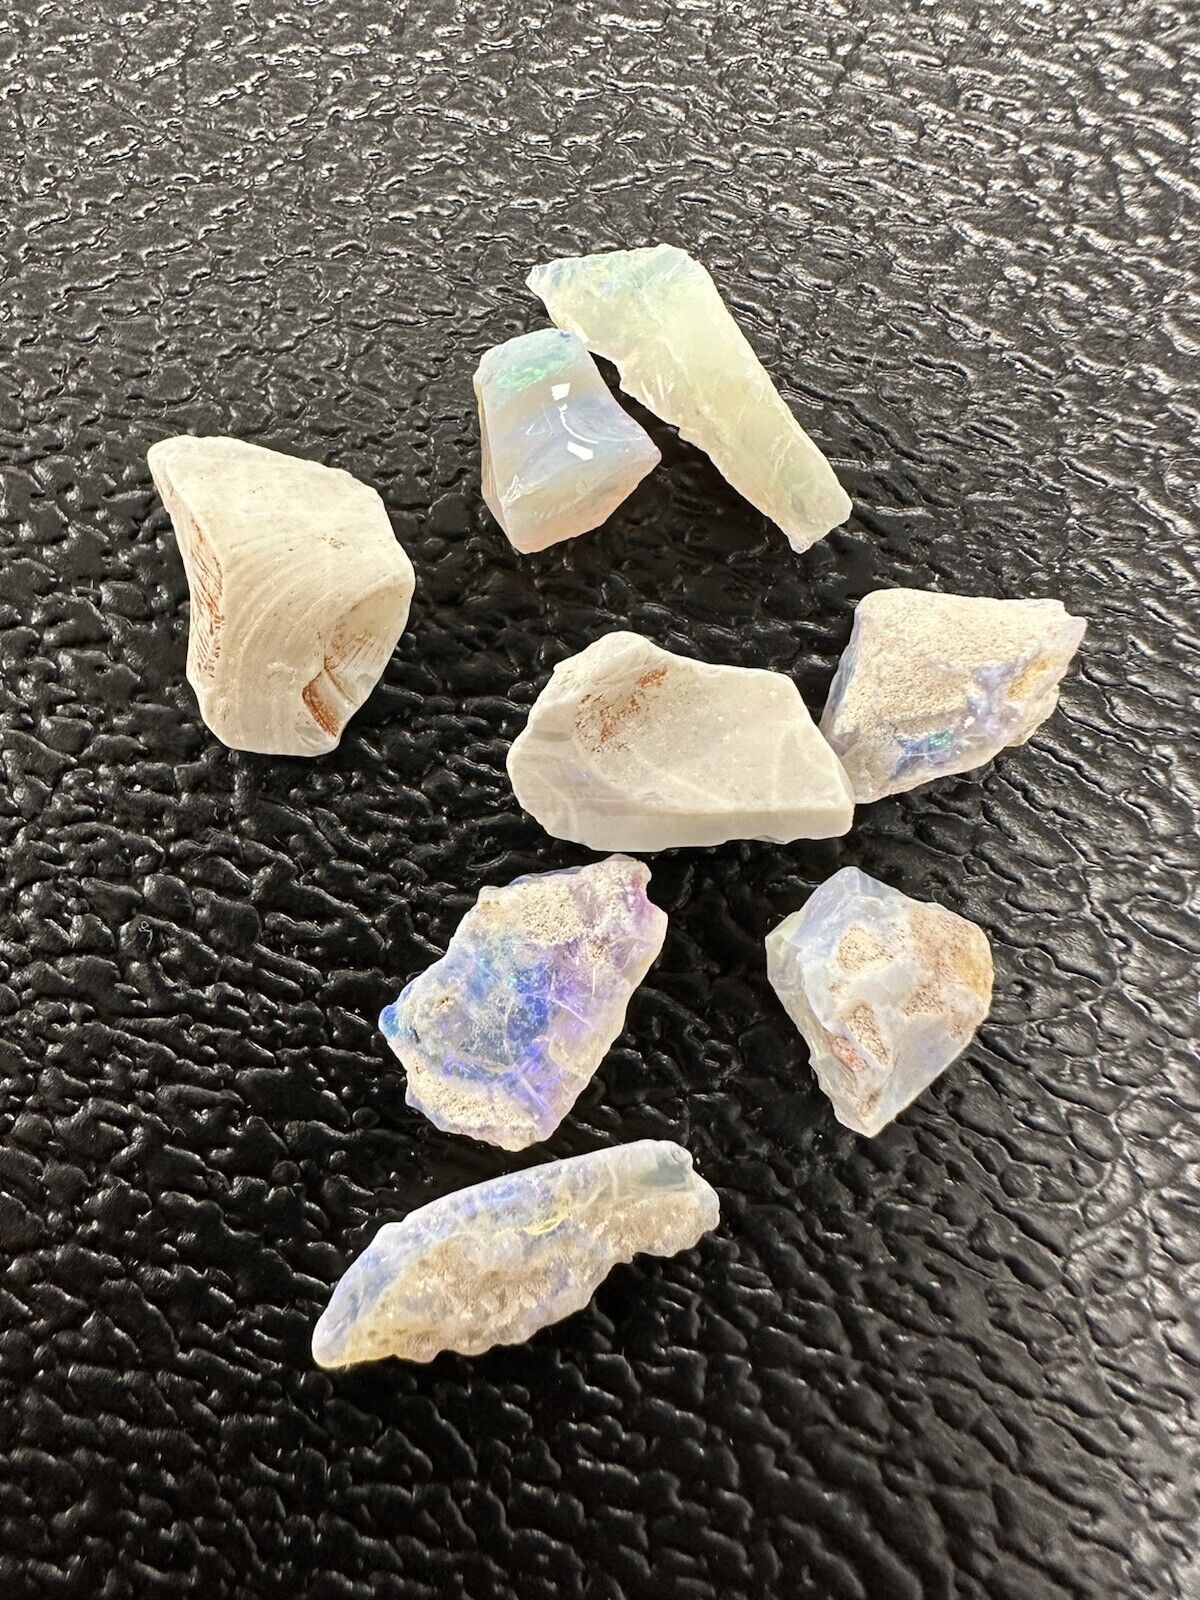 Lot Of Welo Opals - Weight 6.1 Grams (8 Pieces) #WO6